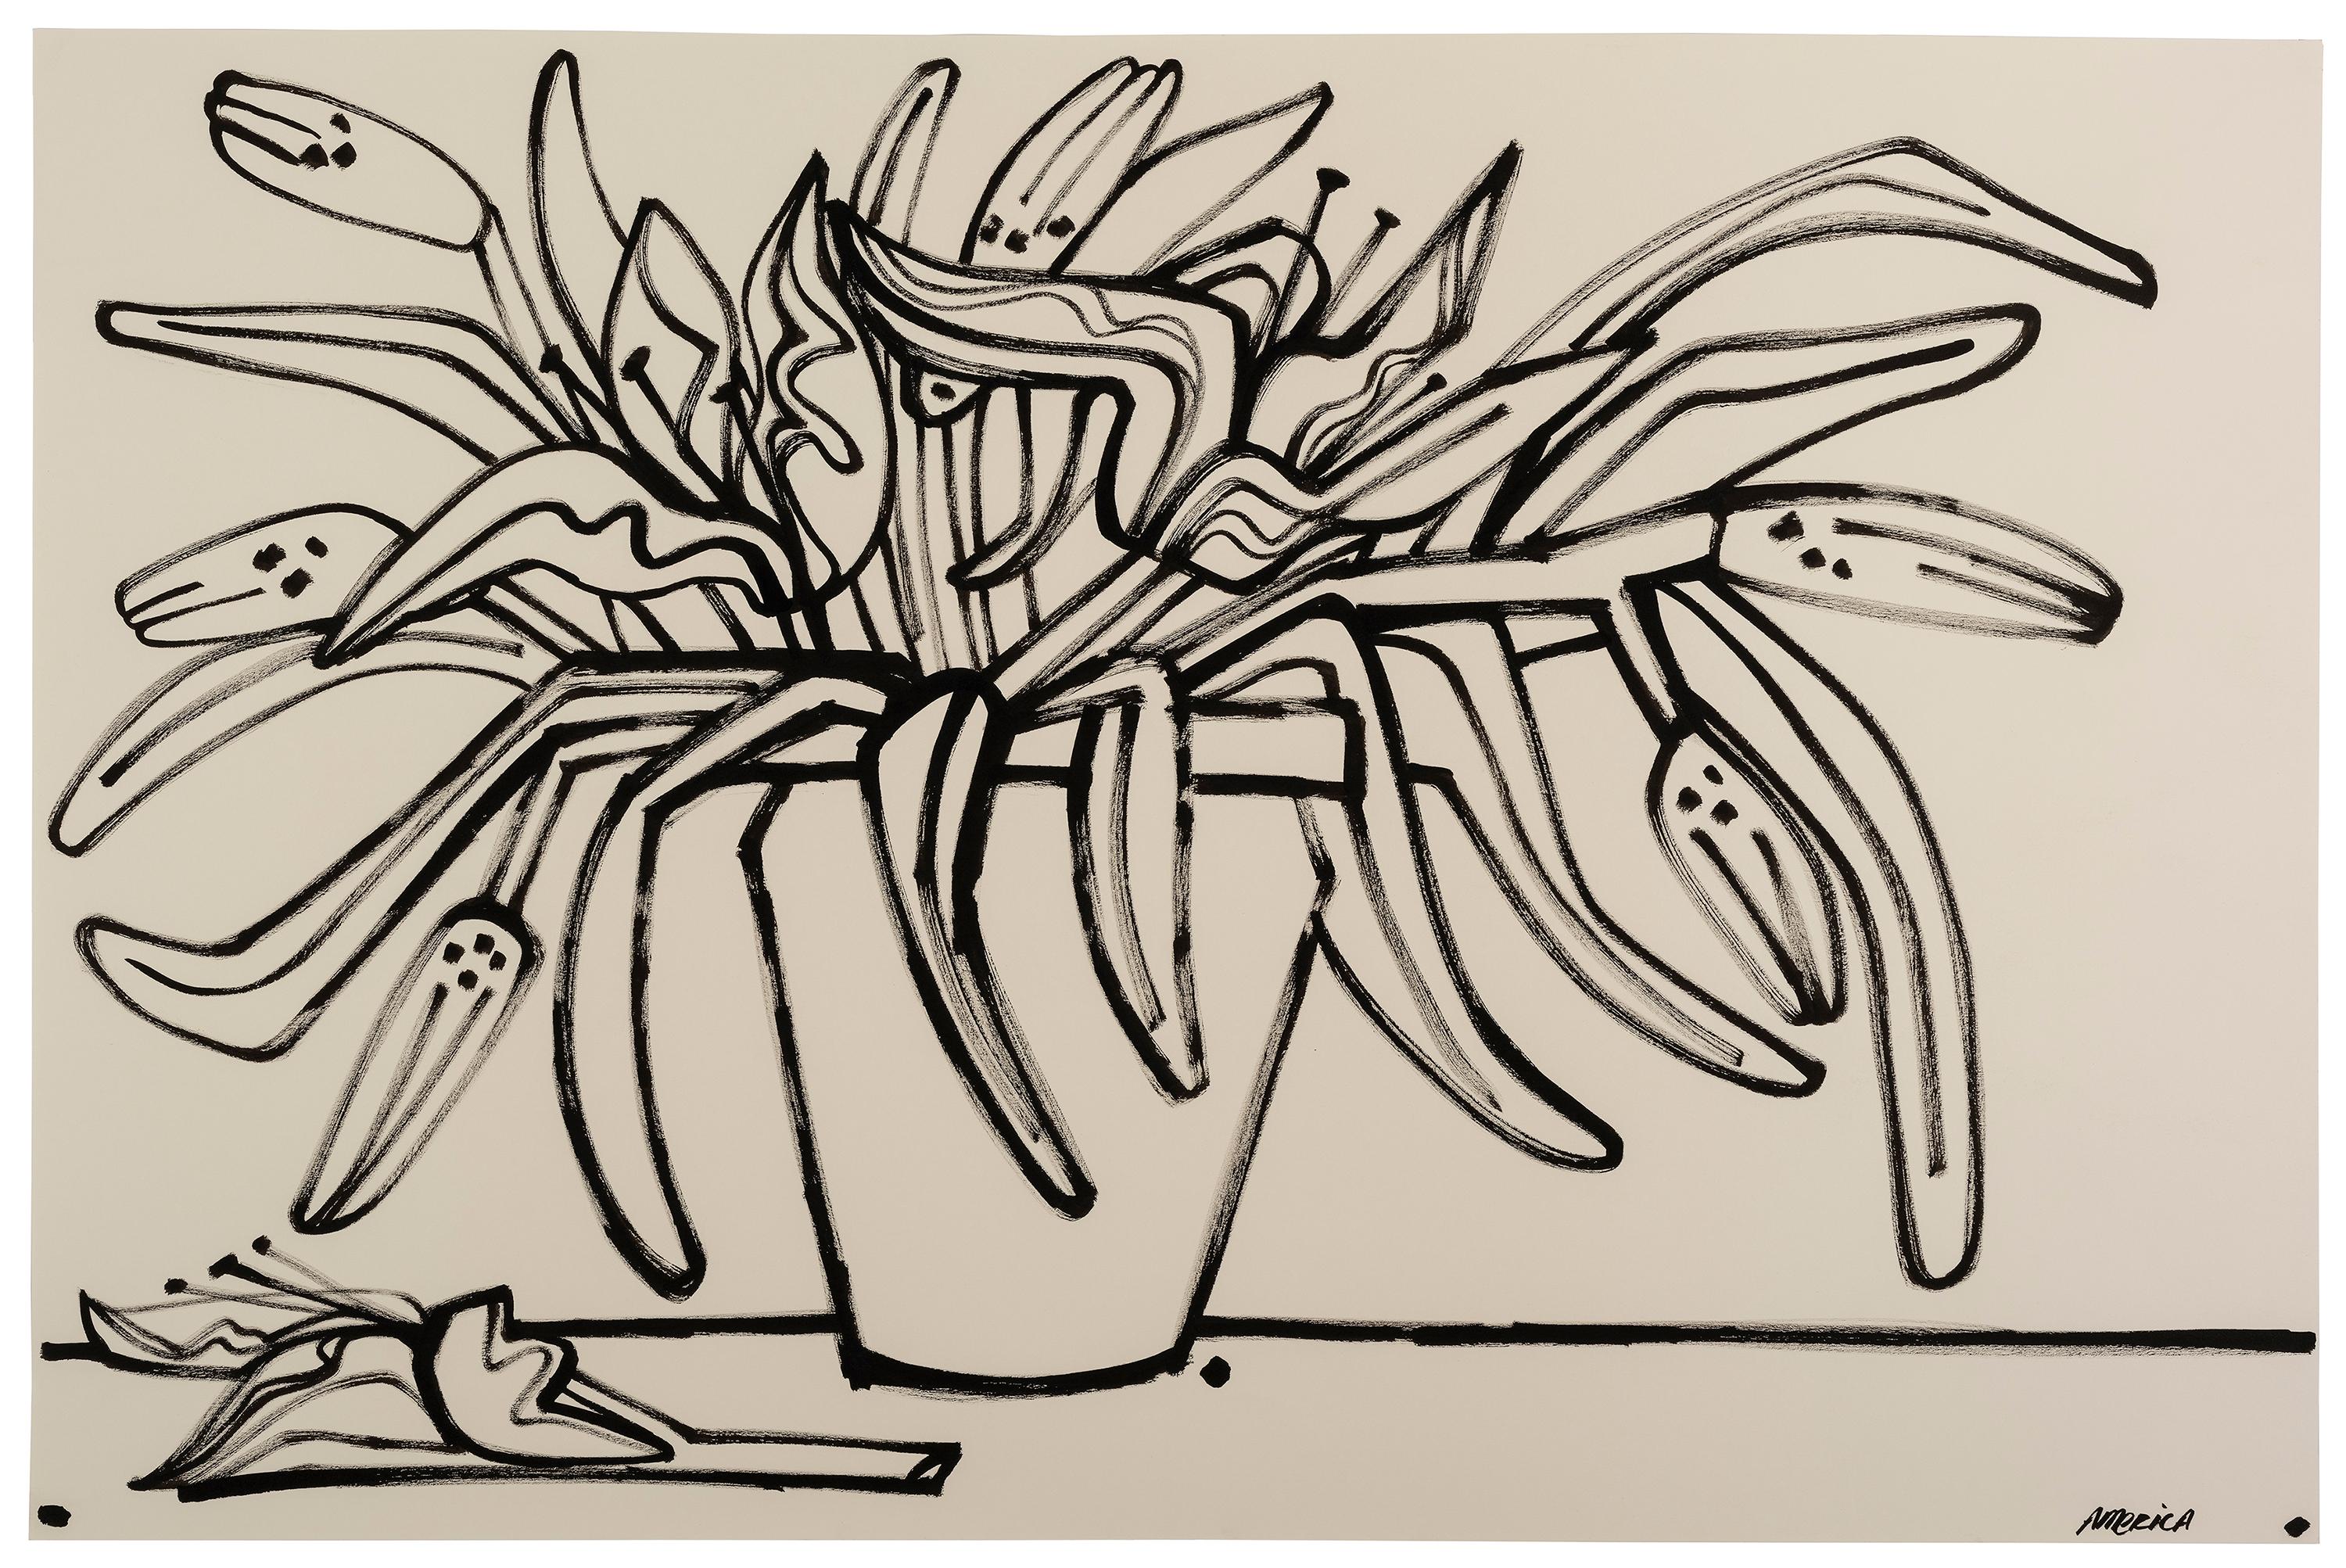 America Martin
"Lillies in Clay Pot"
Ink on Paper
32” x 45.75” Framed


AMERICA MARTIN is an internationally represented Colombian-American fine artist based in Los Angeles. America is a painter and a sculptor. The magnetic pull of Martin's work is